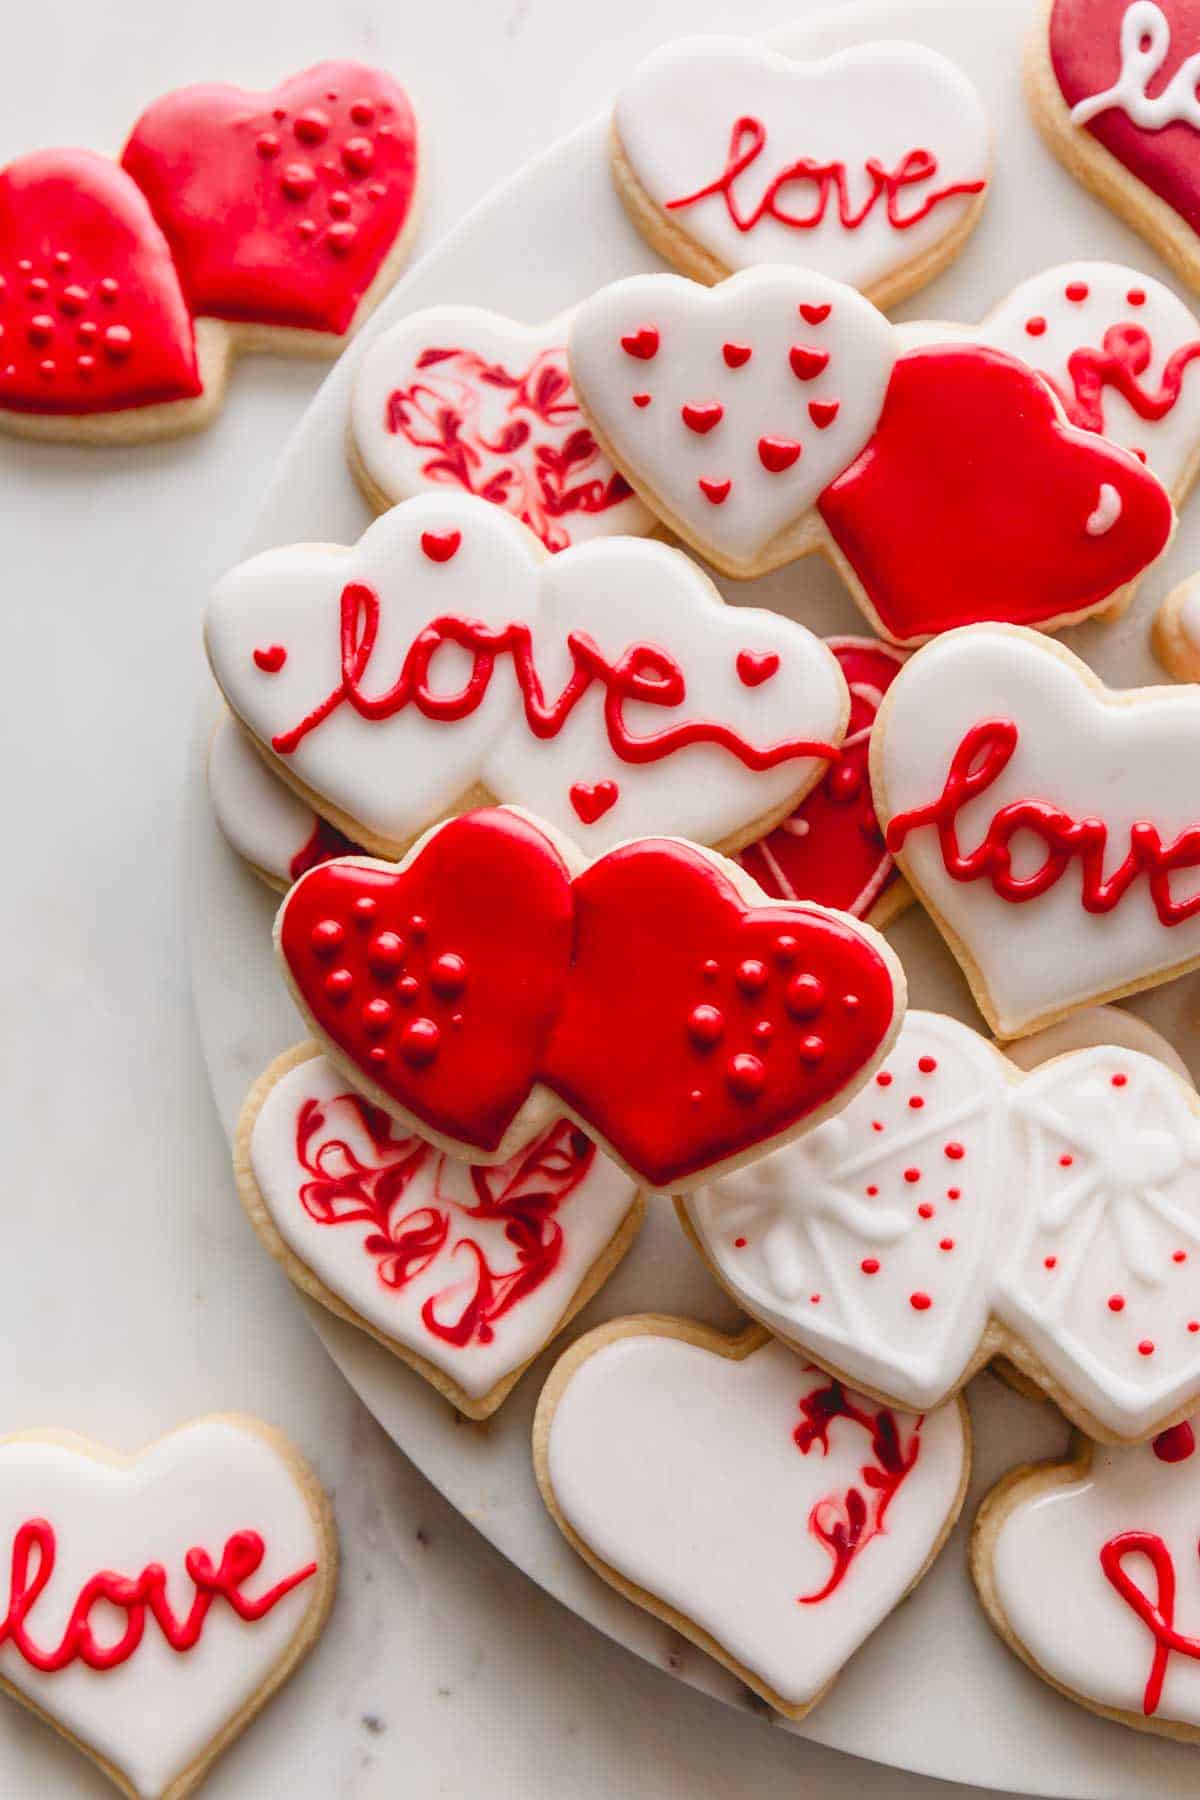 Valentine's Day sugar cookies with red and white icing.